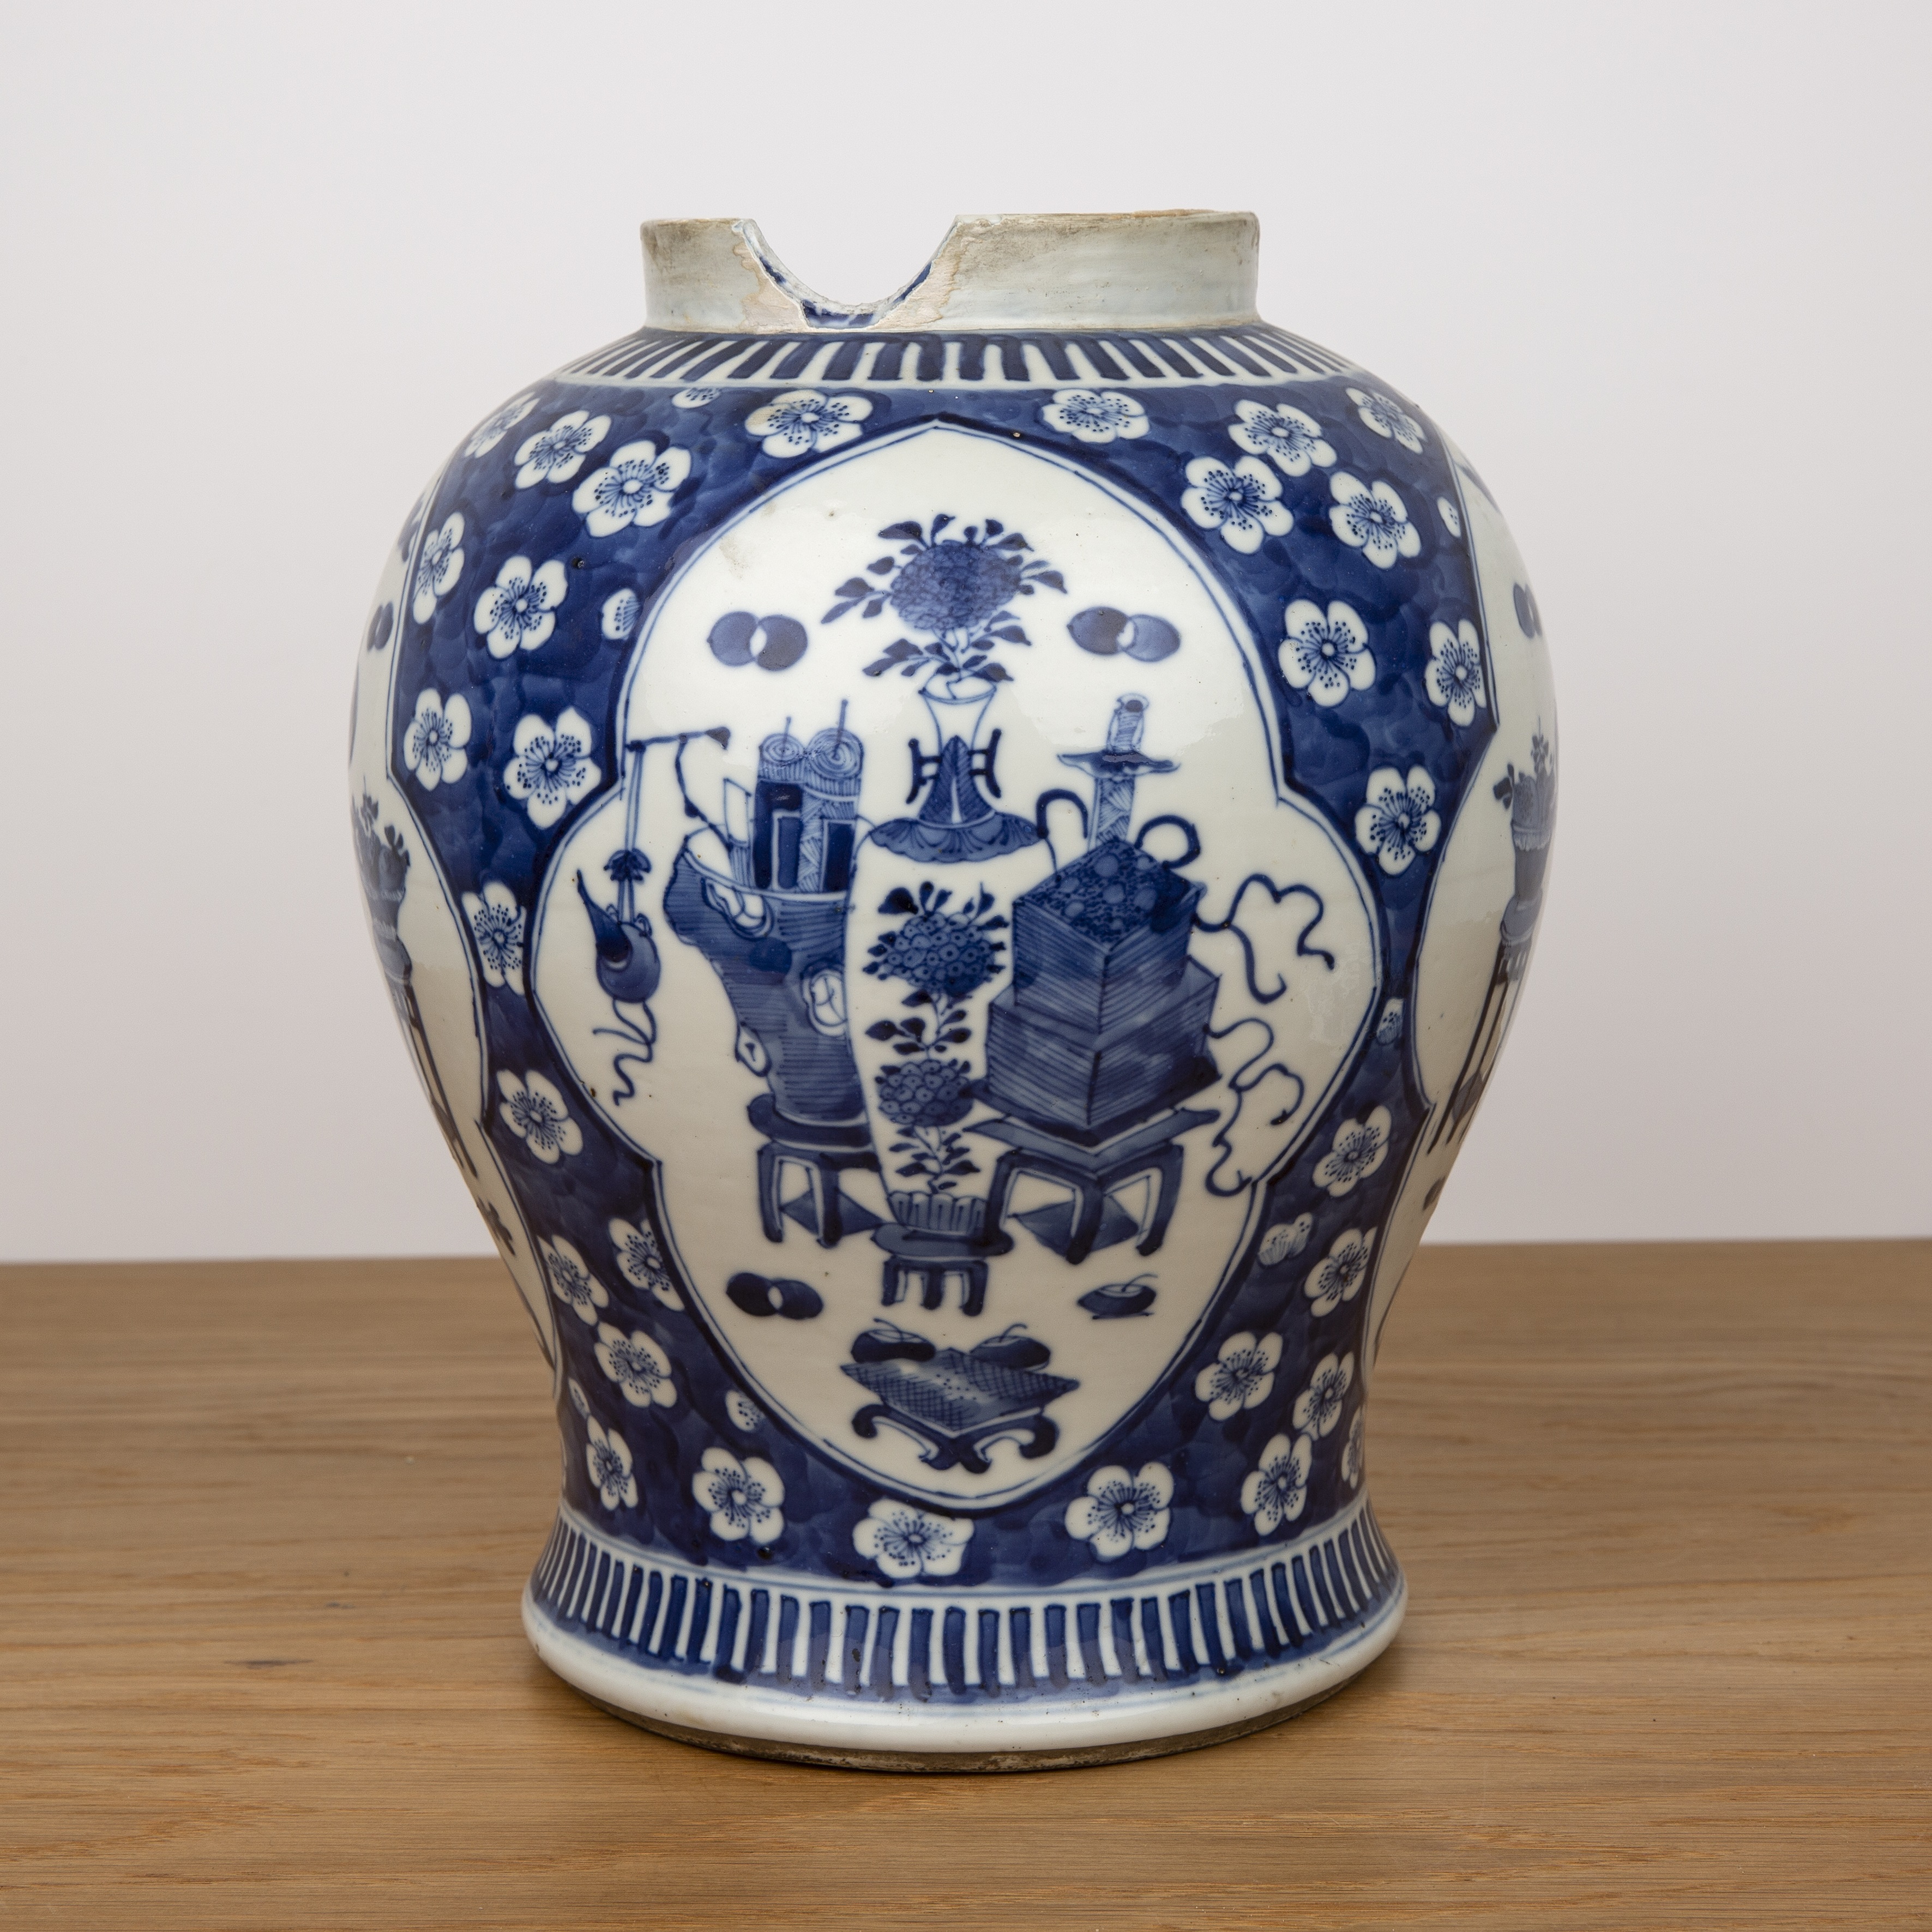 Blue and white porcelain vase and cover Chinese, 19th Century painted with panels of 'antiques' - Image 4 of 7